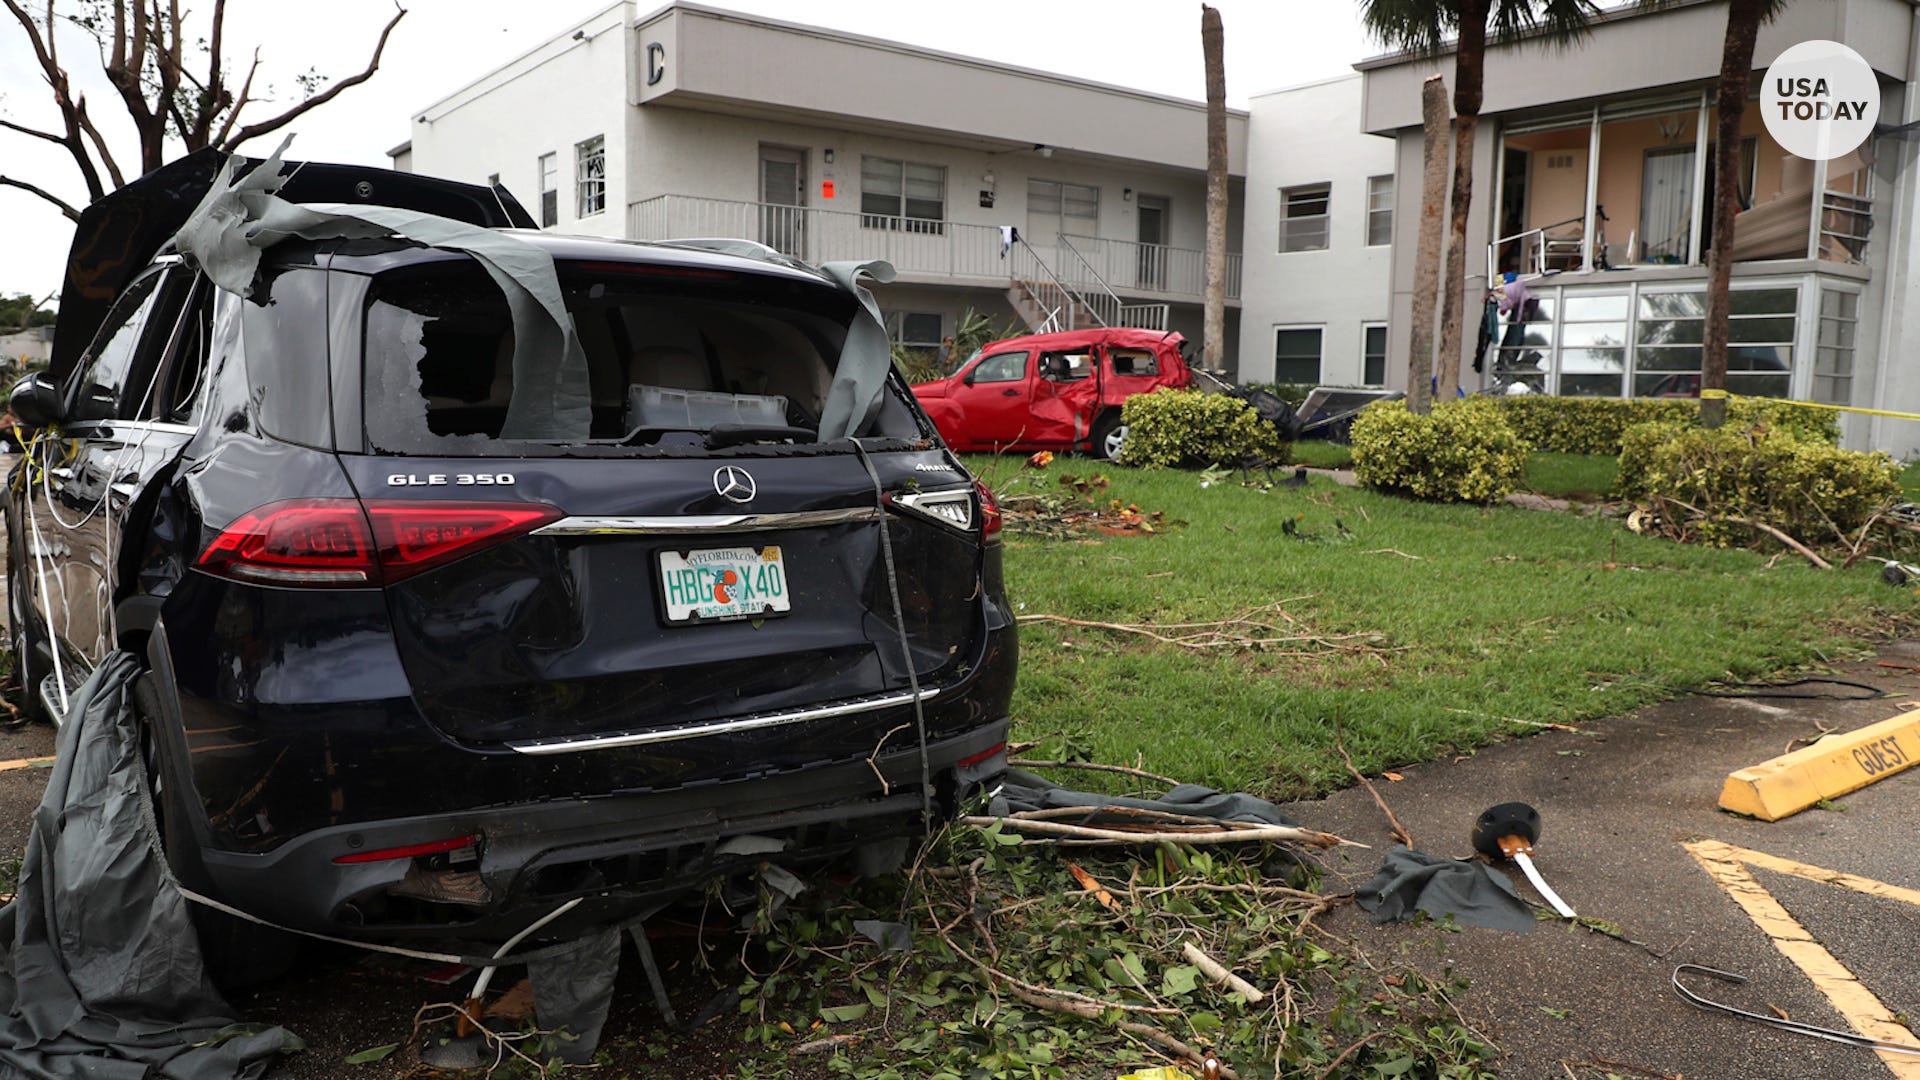 Heavy winds and floodwaters batter cities as Hurricane Ian makes landfall in Florida